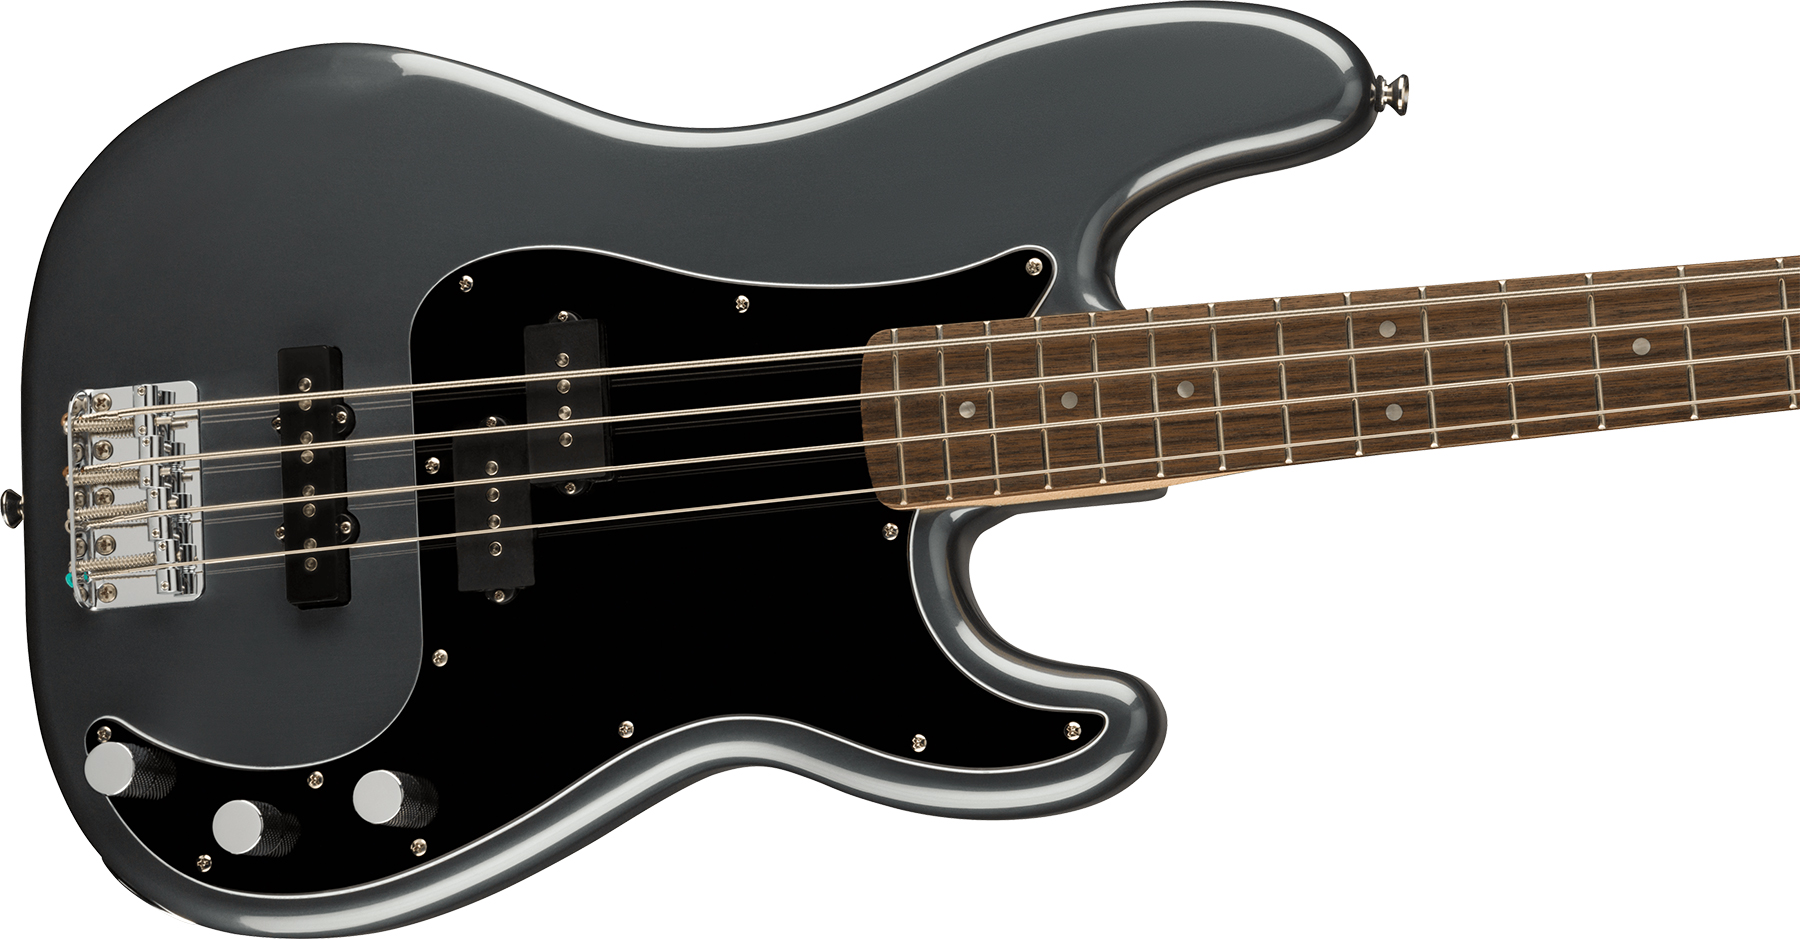 Squier Precision Bass Affinity Pj 2021 Lau - Charcoal Frost Metallic - Solid body electric bass - Variation 2